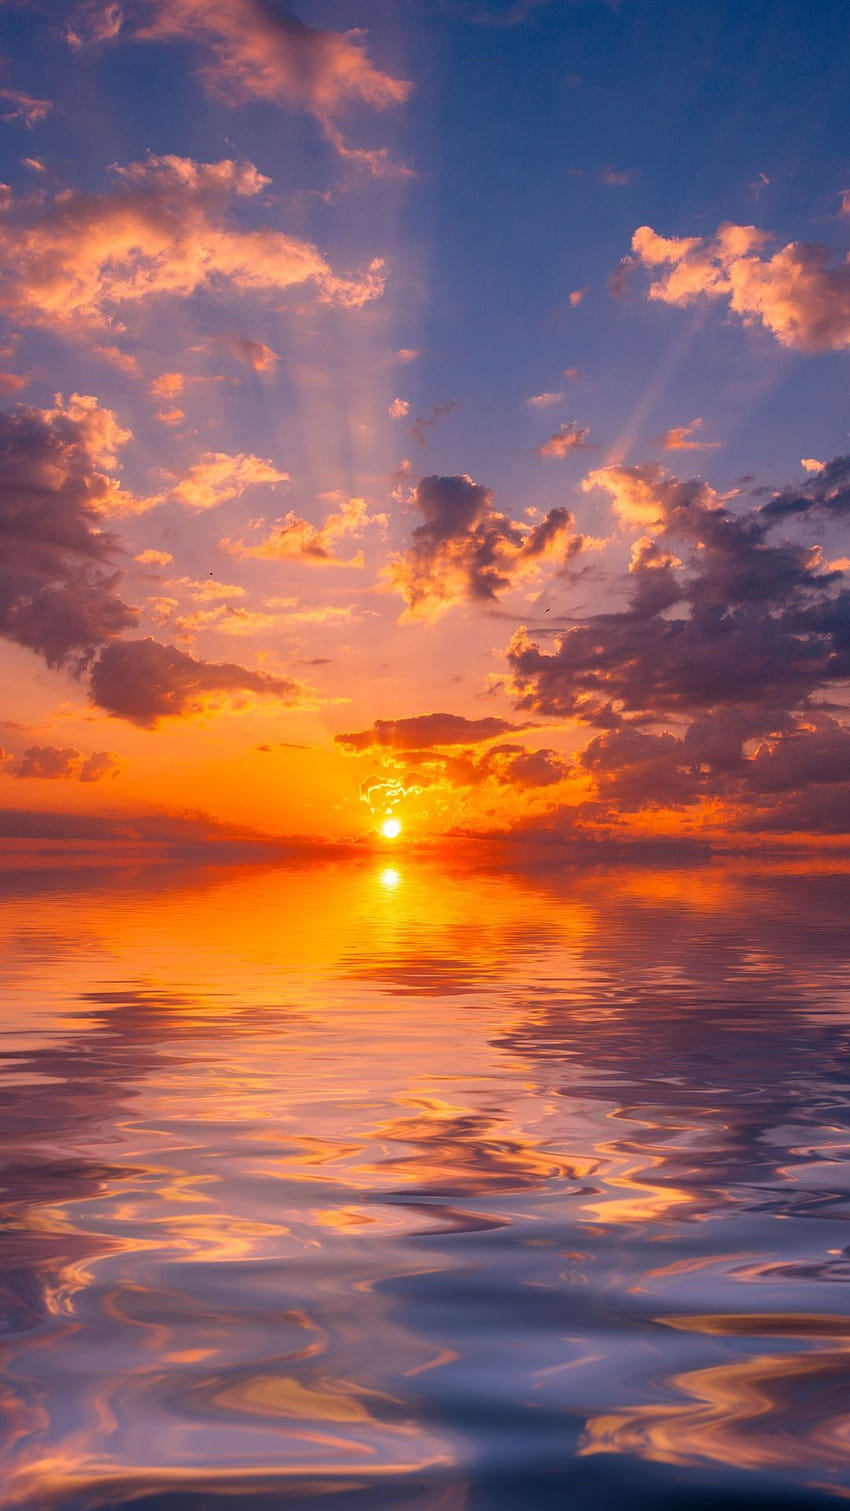 50 Beautiful Cloud and sunset wallpapers - Simply Blessed Shy